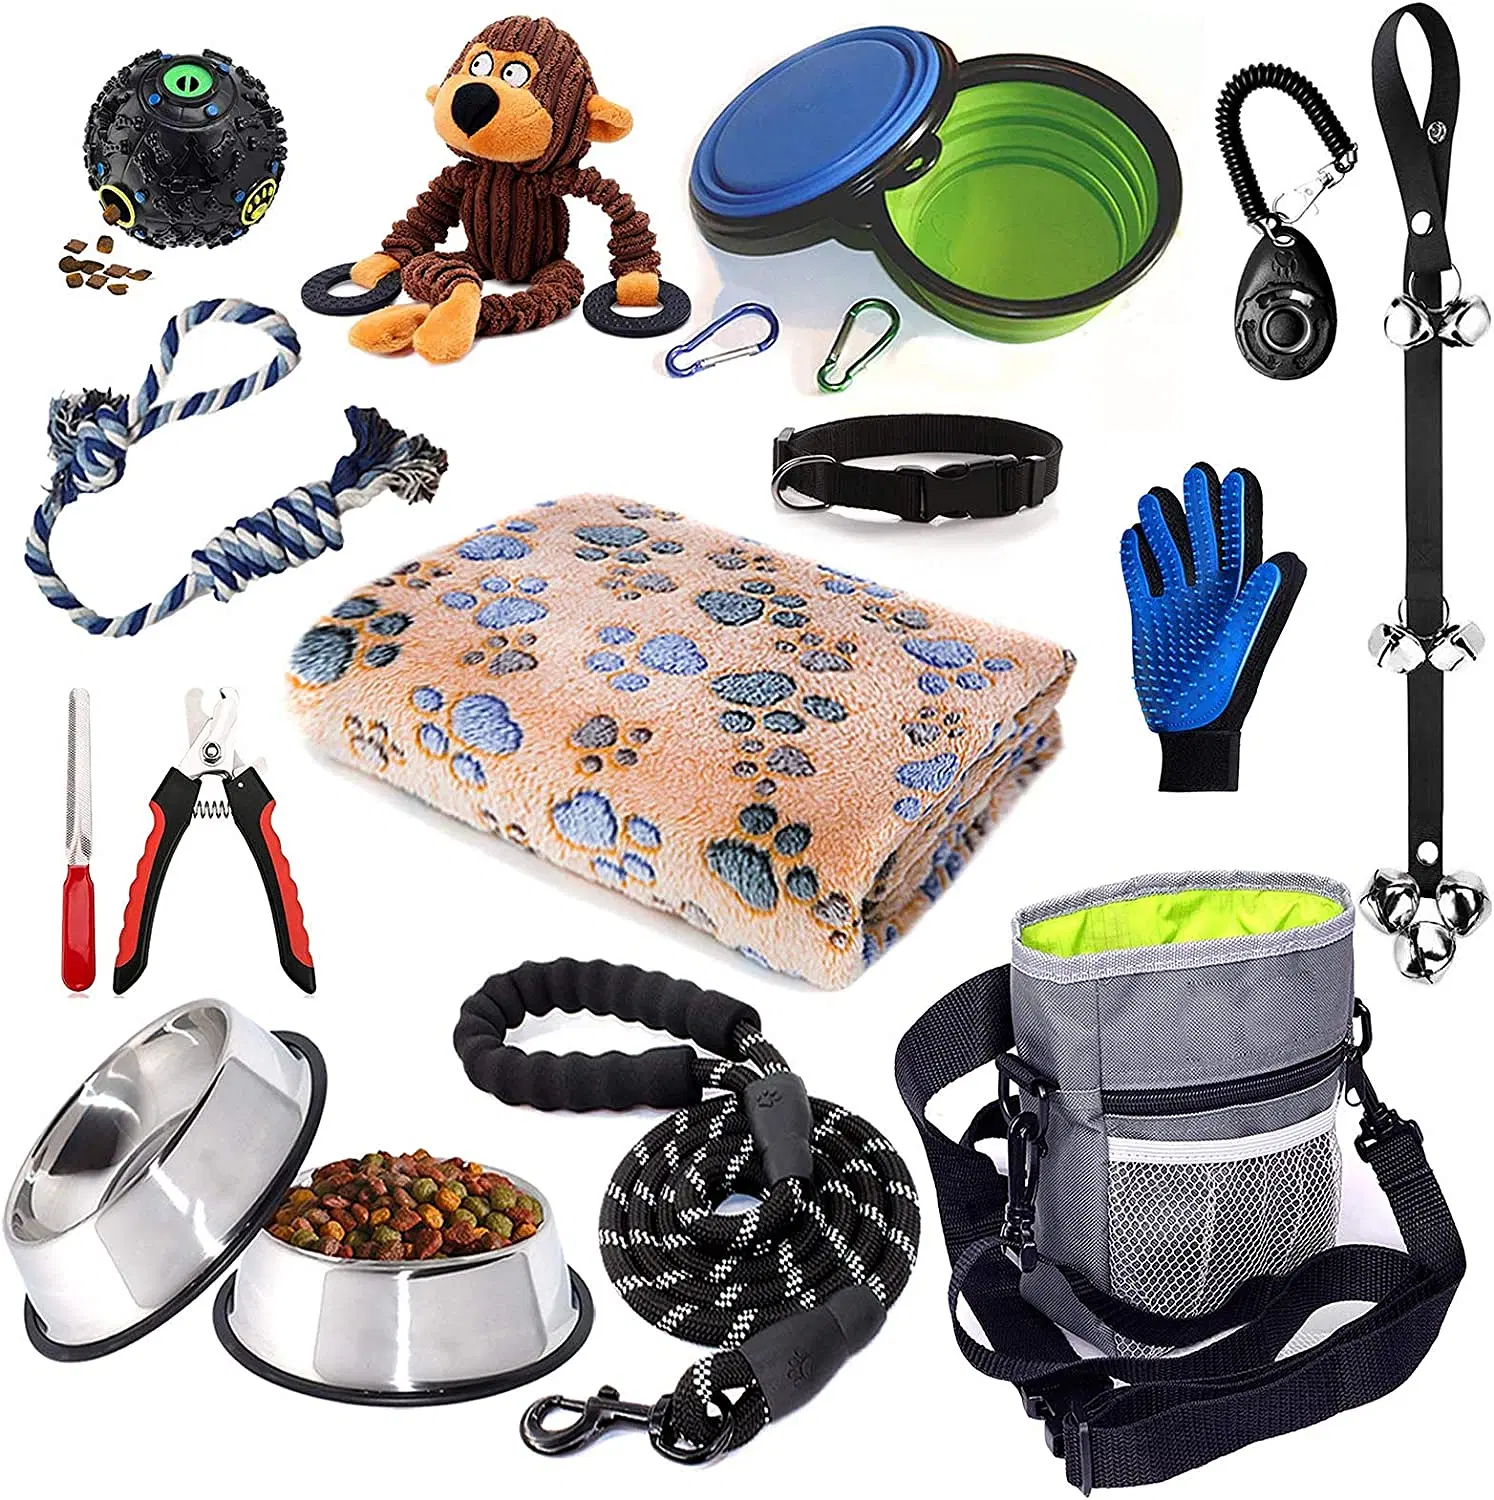 The Best Pet Accessories: Tips for Outfitting Your Pet in Style